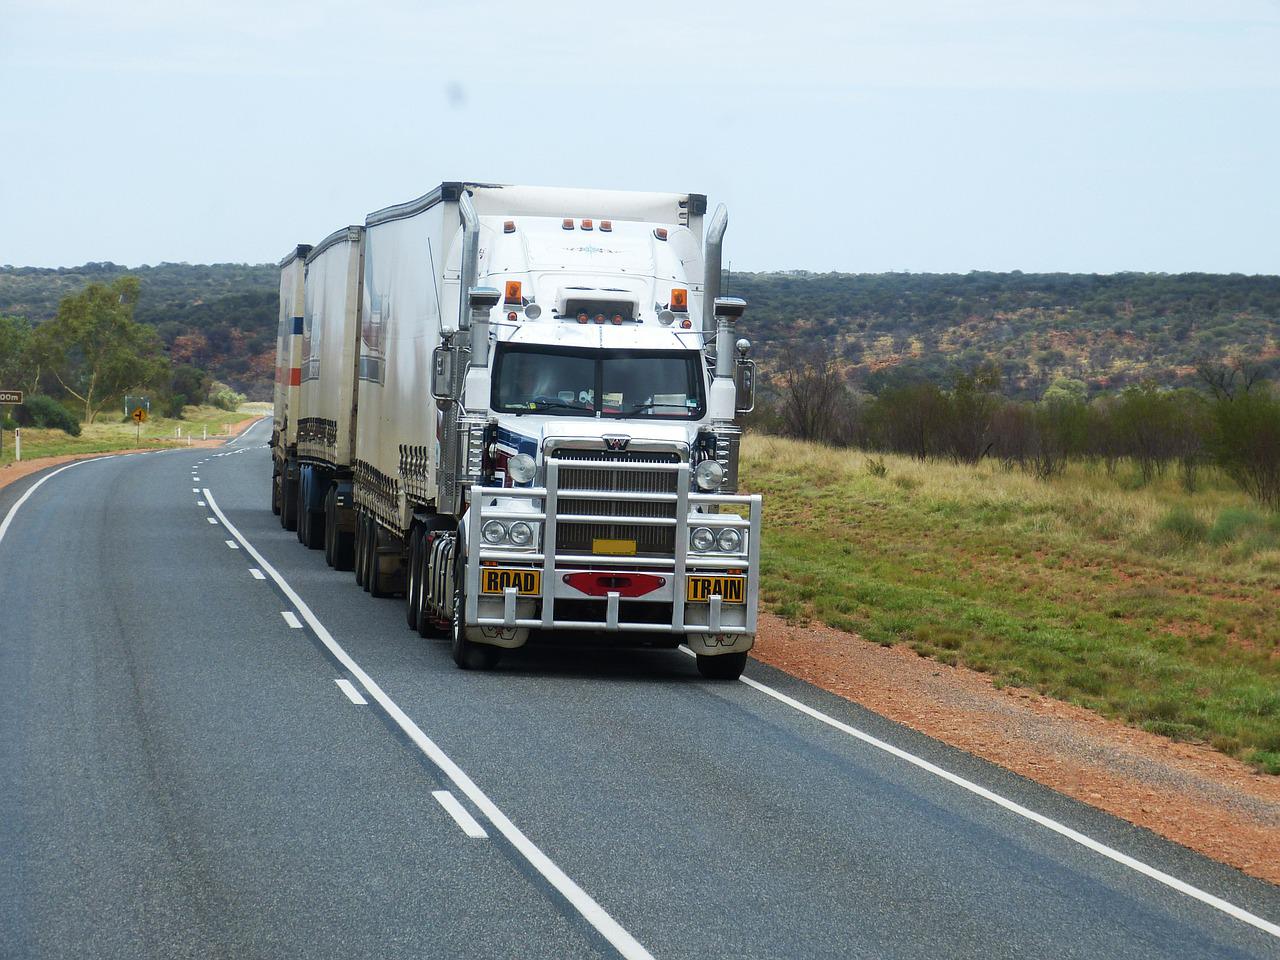 white semi truck driving on road - supply chain issues cause slowdowns and potential food contamination